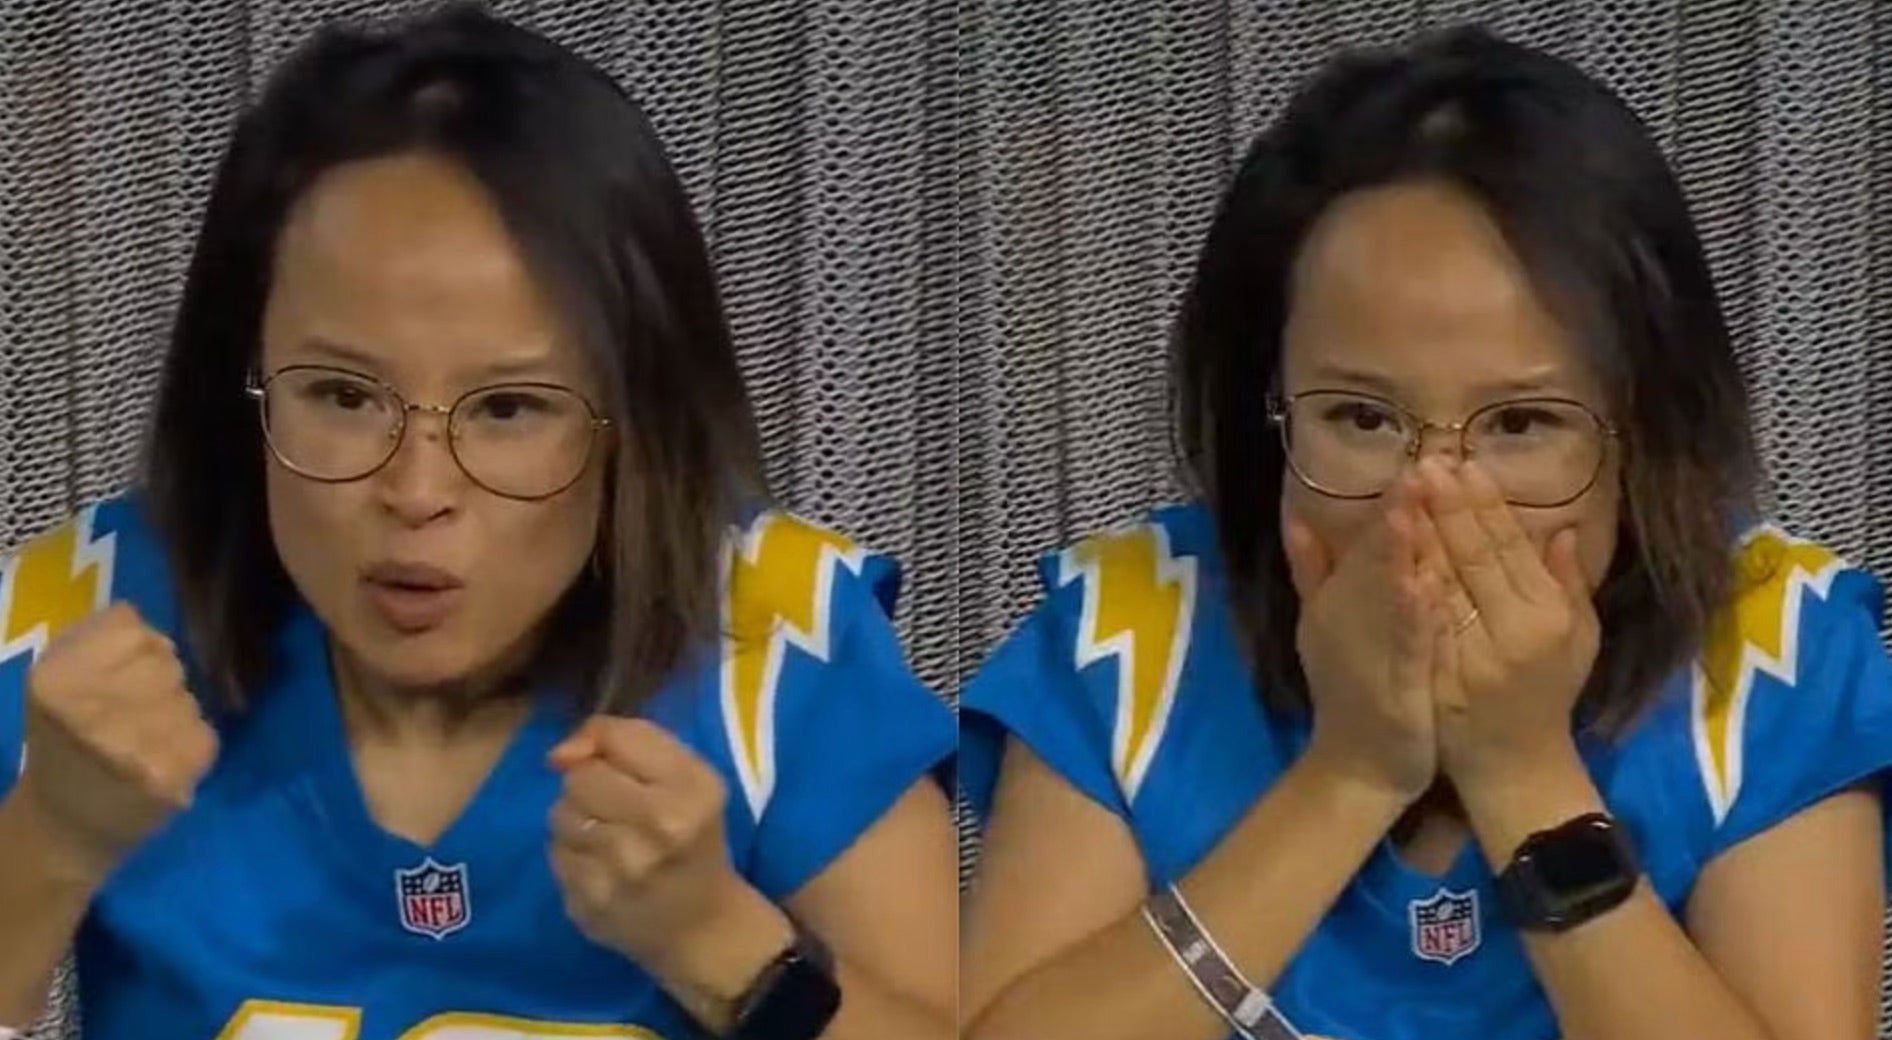 Video The story behind viral video of fan's emotional reaction to